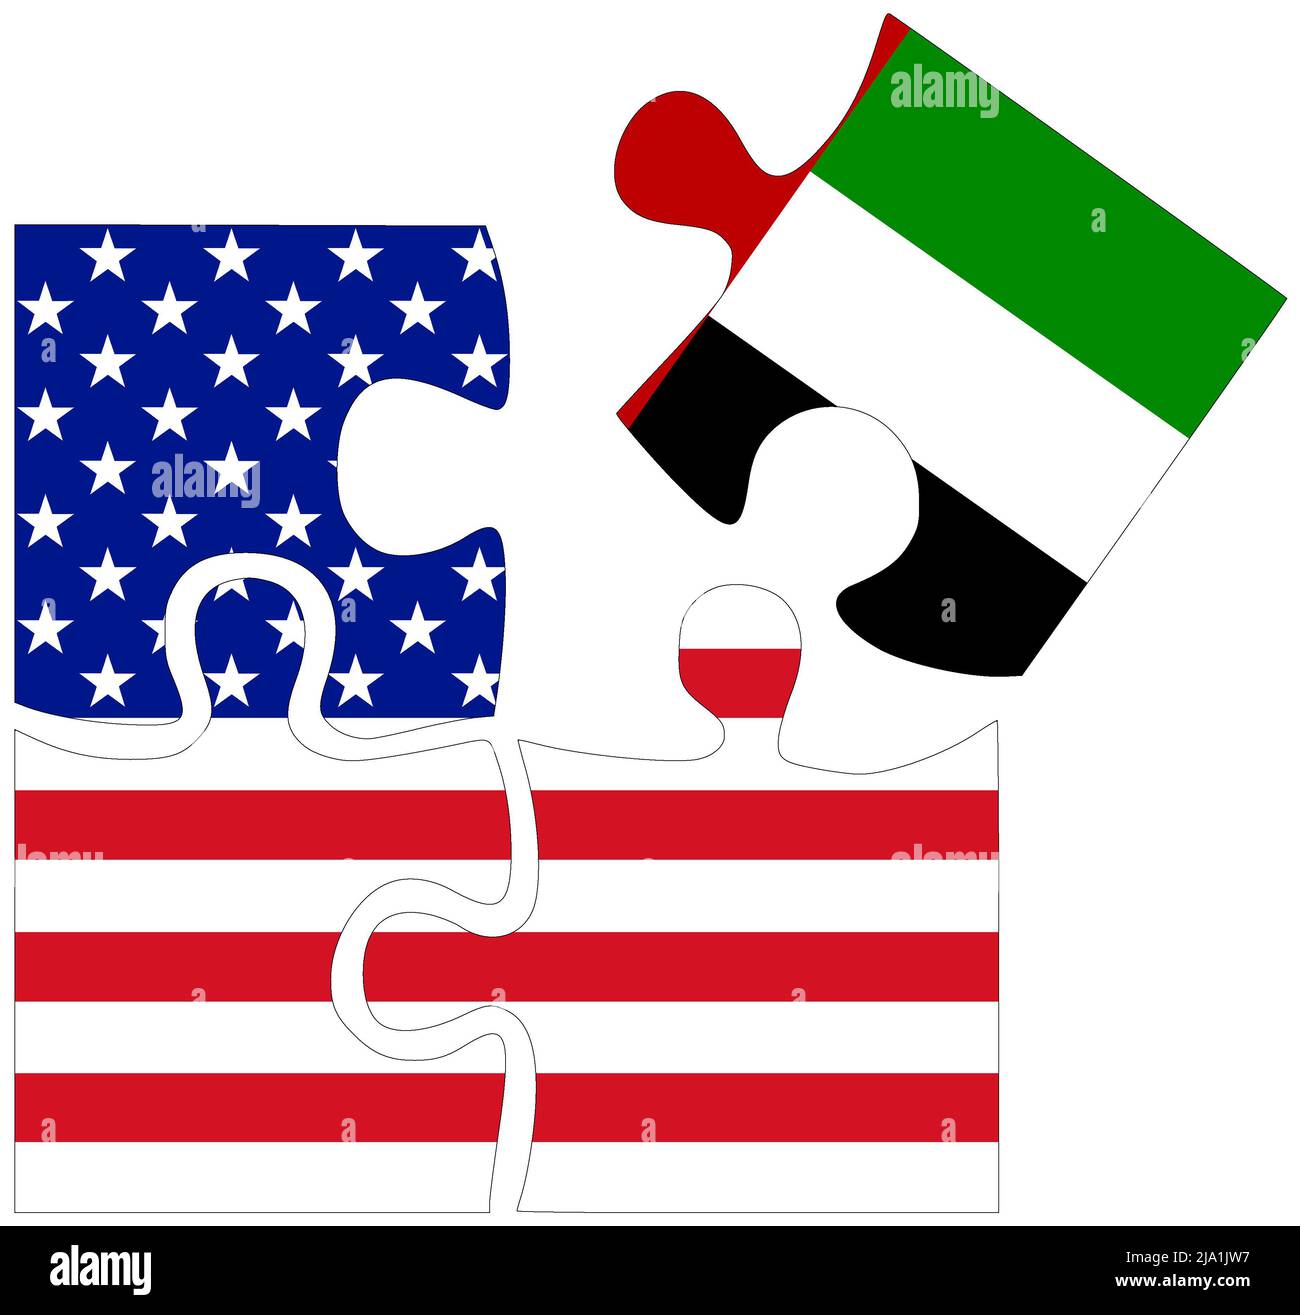 USA - UAE : puzzle shapes with flags, symbol of agreement or friendship Stock Photo